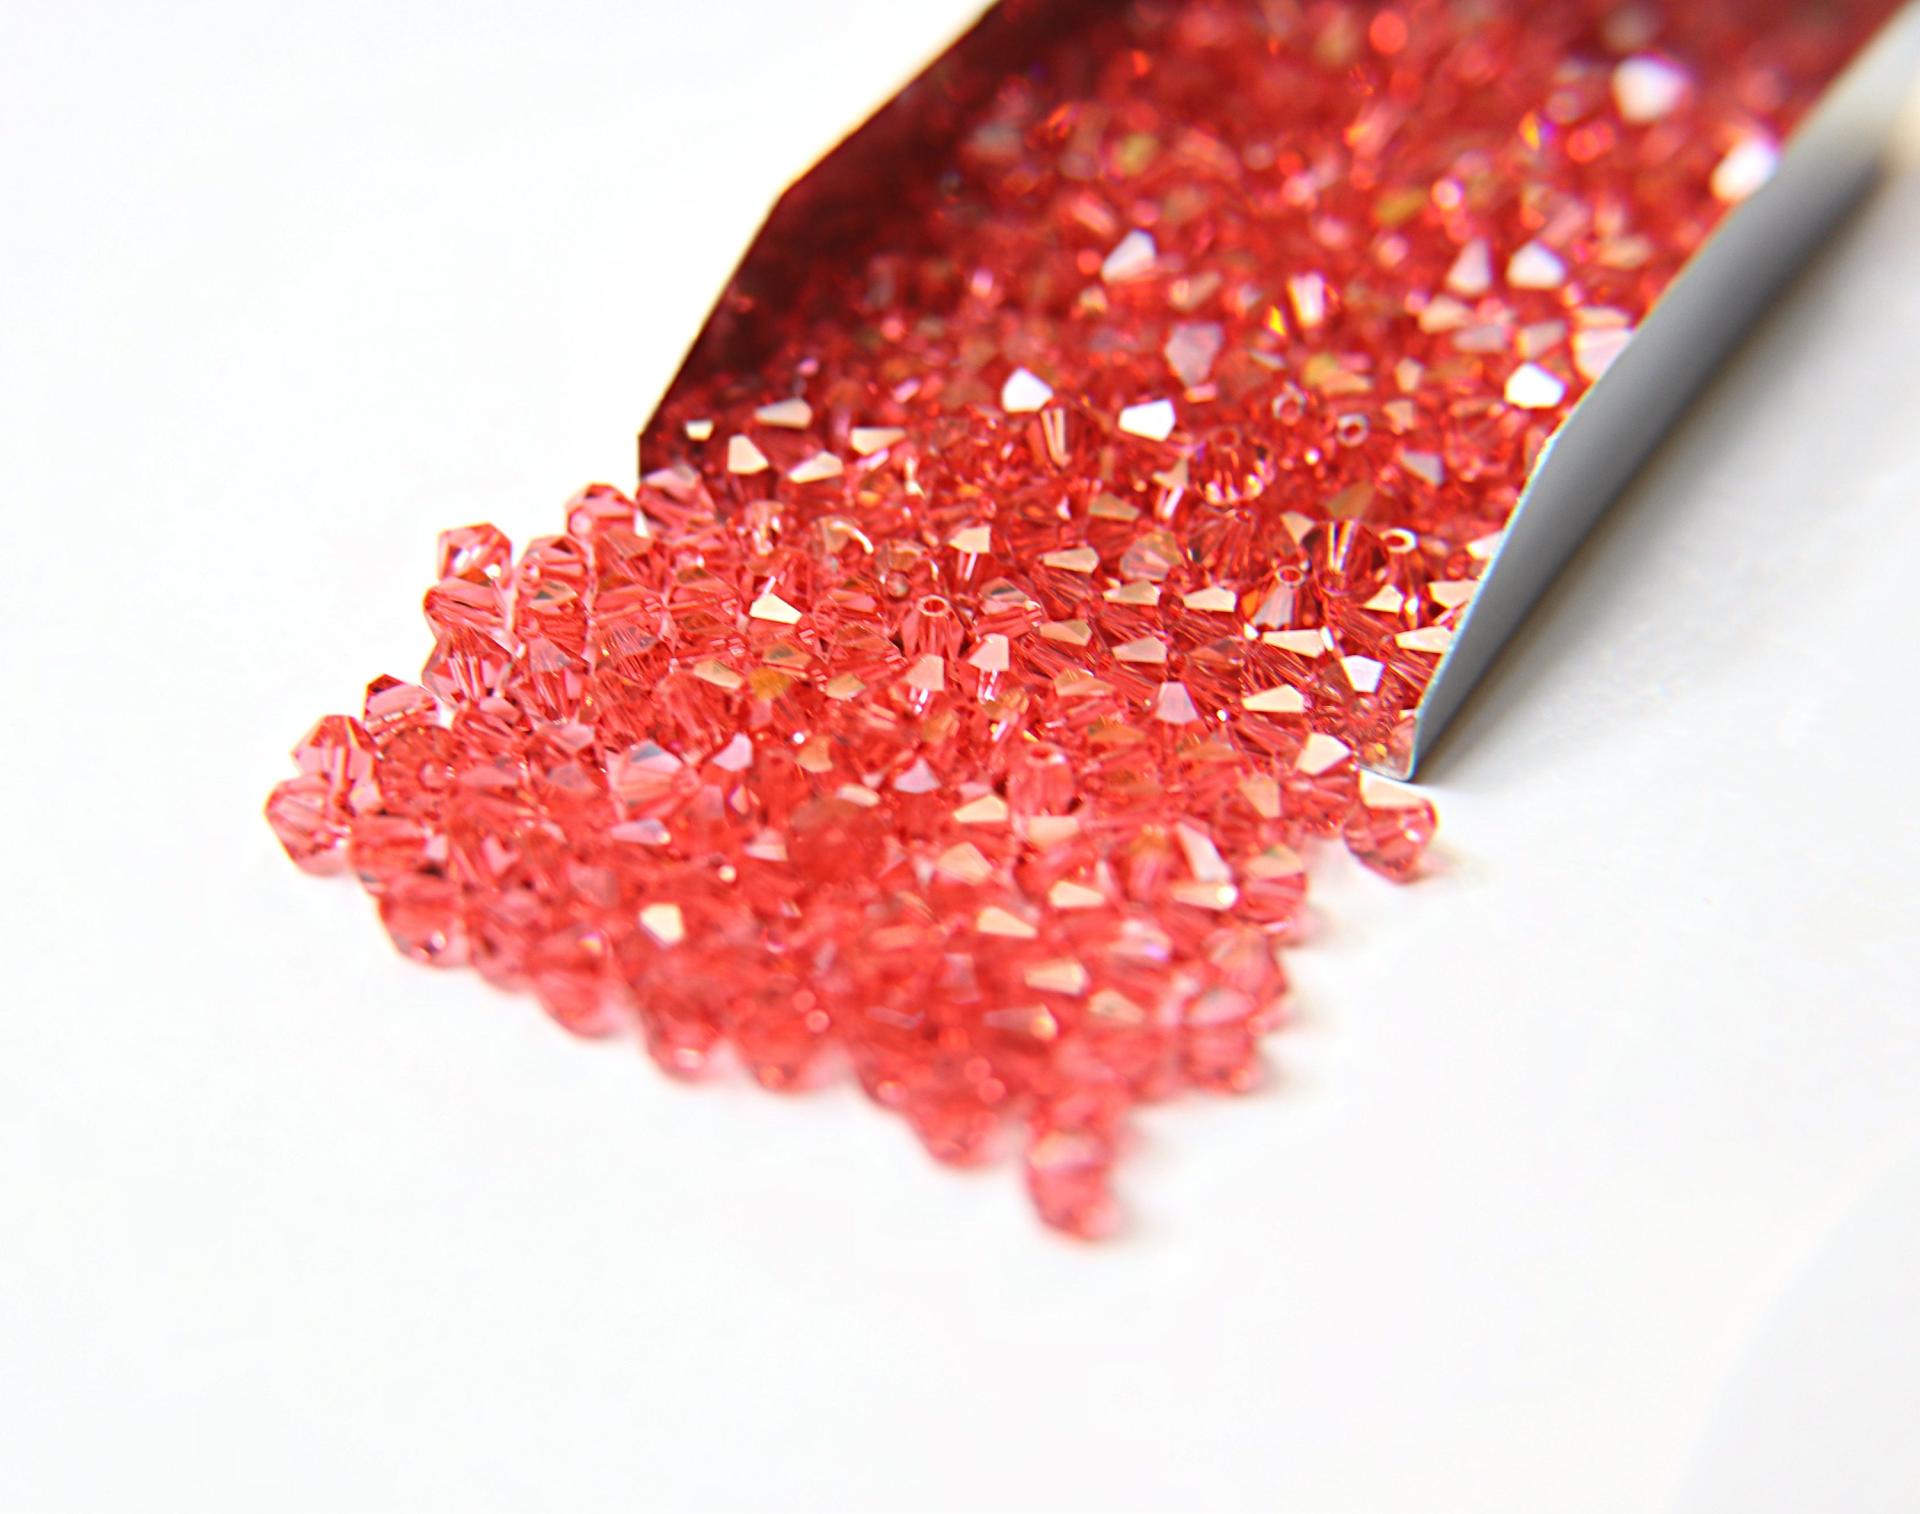 4/5mm Padparadscha Swarovski Bicone 12/36/72/144/432/720 Pieces (542) jewelry making beads, embroidery materials, jewelry supply